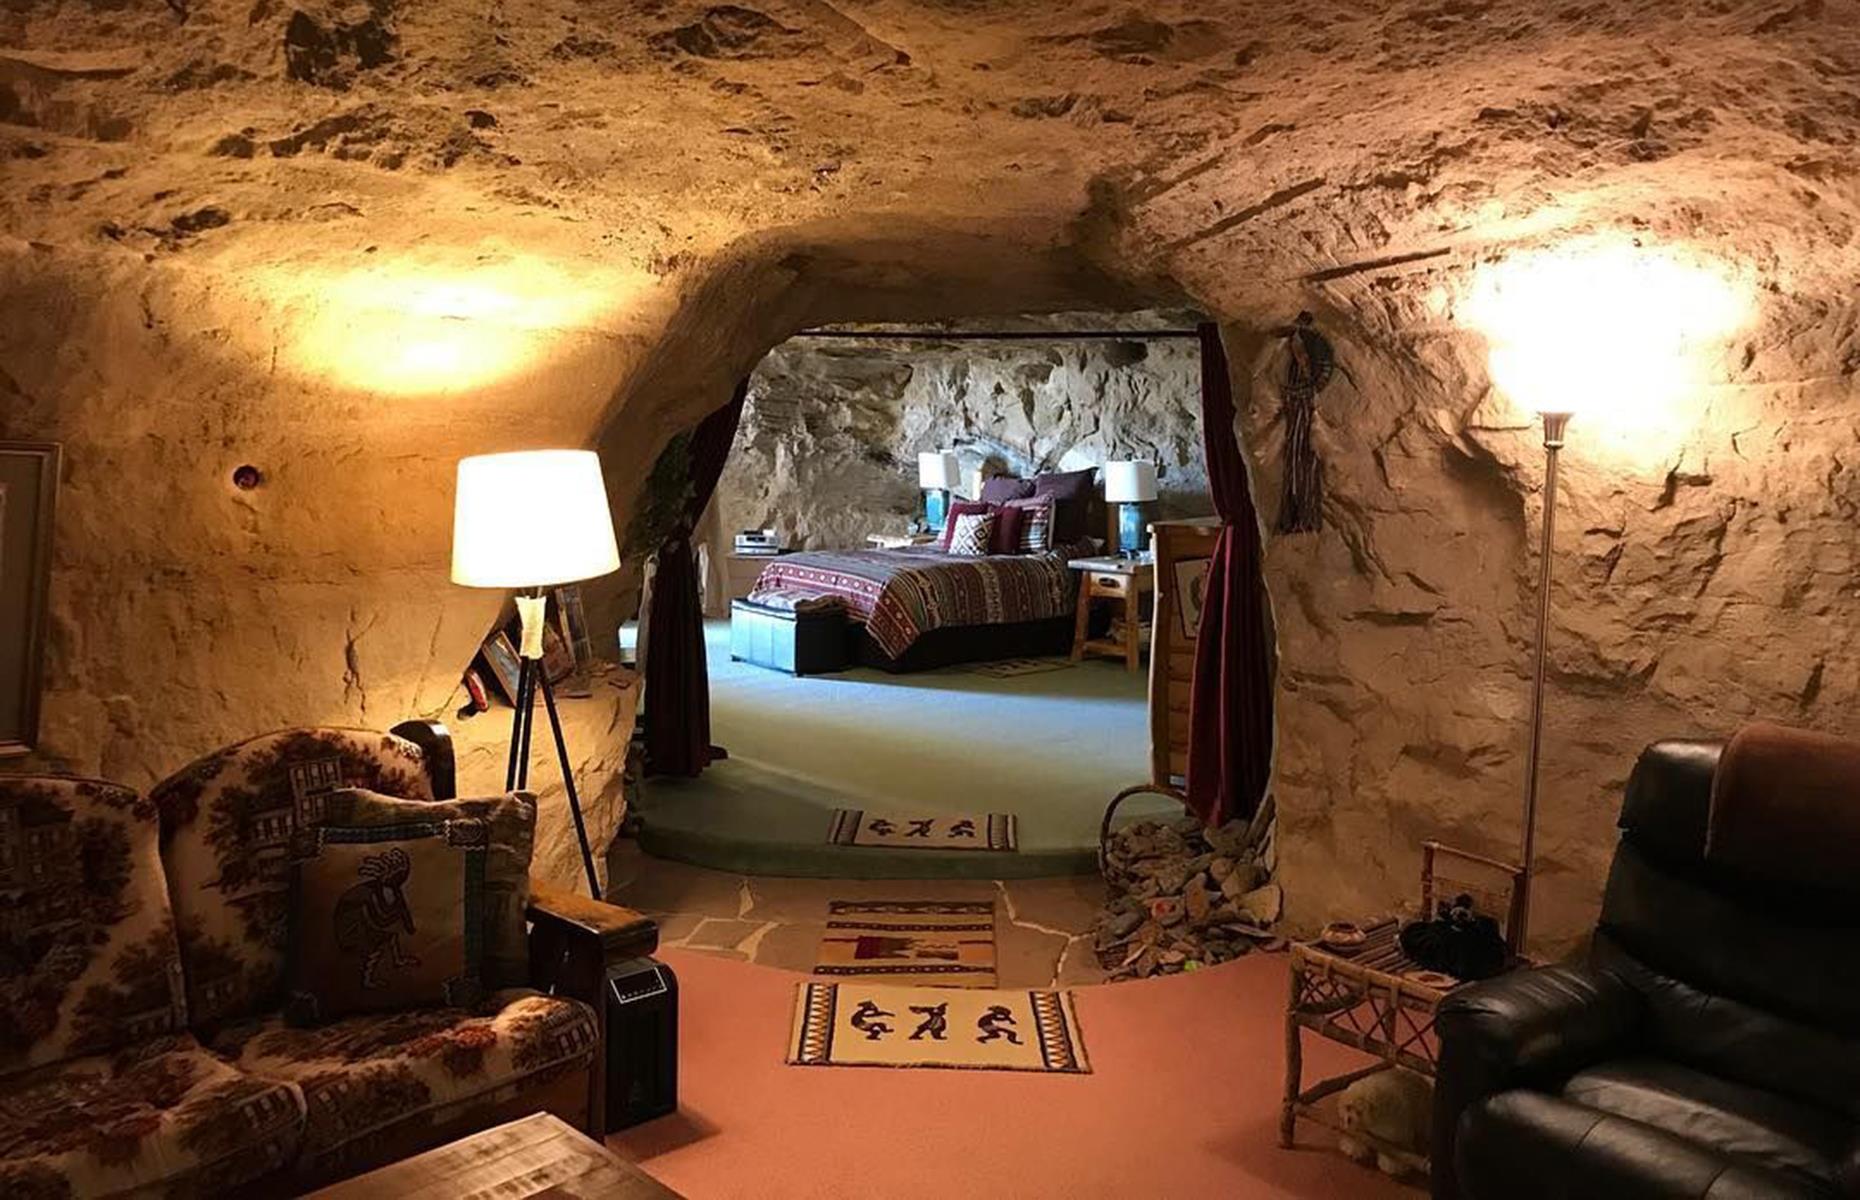 <p>A 1,700-square-foot (158sqm) underground getaway hiding in the sandstone cliffs overlooking the La Plata River Valley in New Mexico, this quaint holiday hideout welcomes intrepid travellers 70 feet (21m) below the cliff's peak. Once guests have navigated the sloping path carved into the rock that leads down to the cave, a spacious living and dining area awaits. Visitors will have the whole place to themselves, with its rock-wall waterfall, mini-Jacuzzi and stunning views out over the valley.</p>